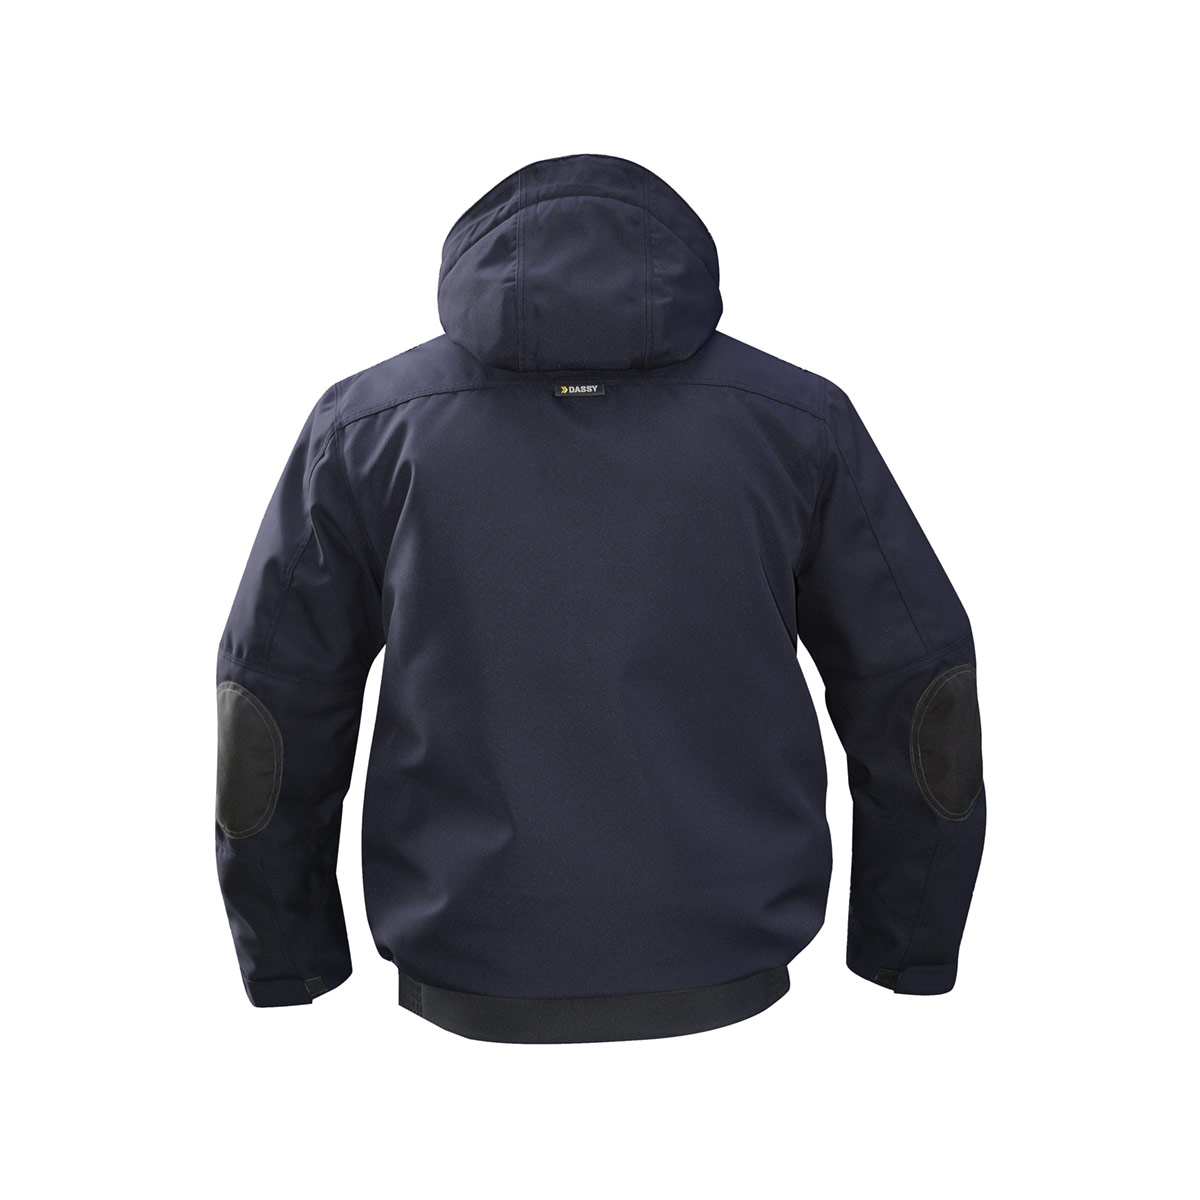 Dassy AUSTIN waterproof and breathable winter jacket